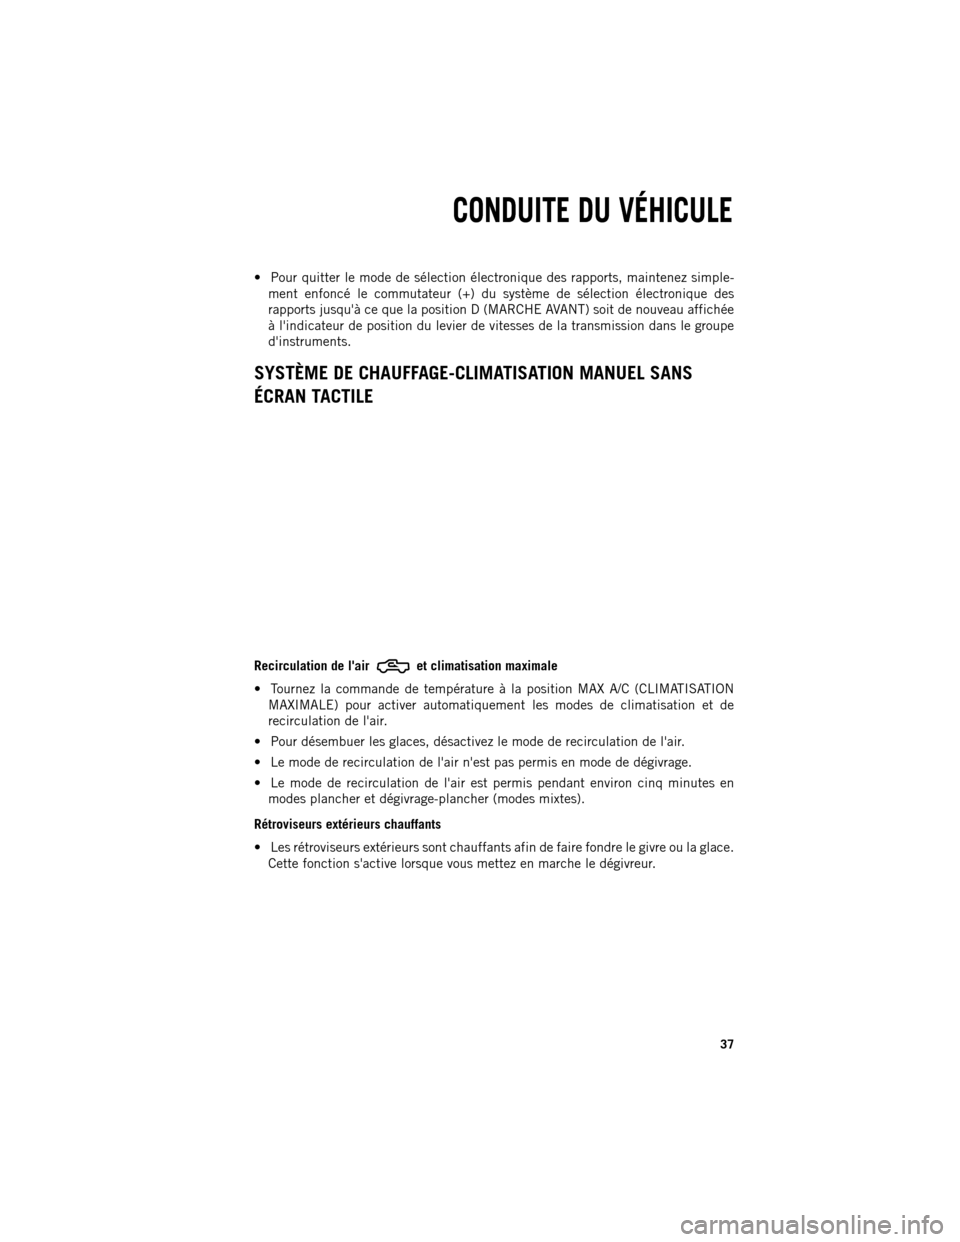 Ram 1500 2013  Guide dutilisateur (in French)  Pour quitter le mode de sélection électronique des rapports, maintenez simple-
ment enfoncé le commutateur (+) du système de sélection électronique des
rapports jusquà ce que la position D (